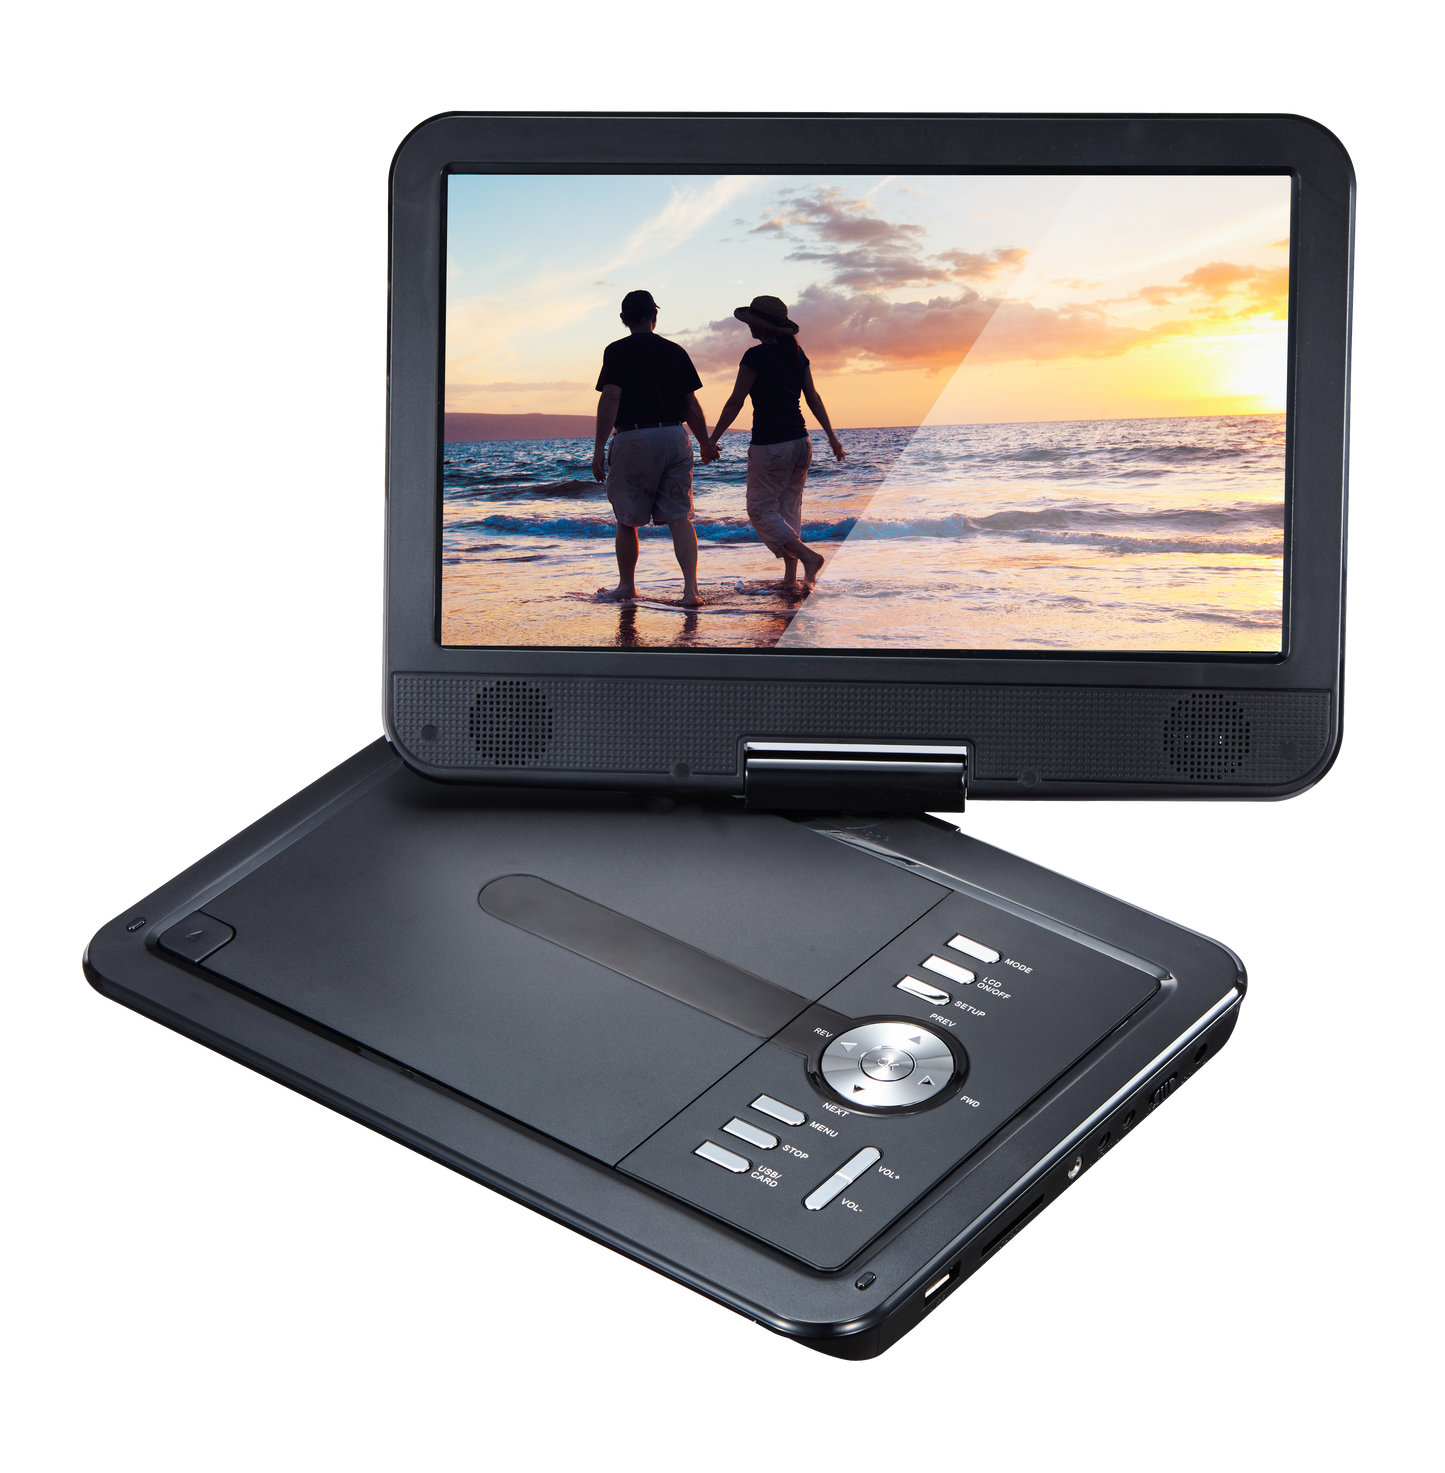 Portable Multimedia Player 10'' (PD1013)